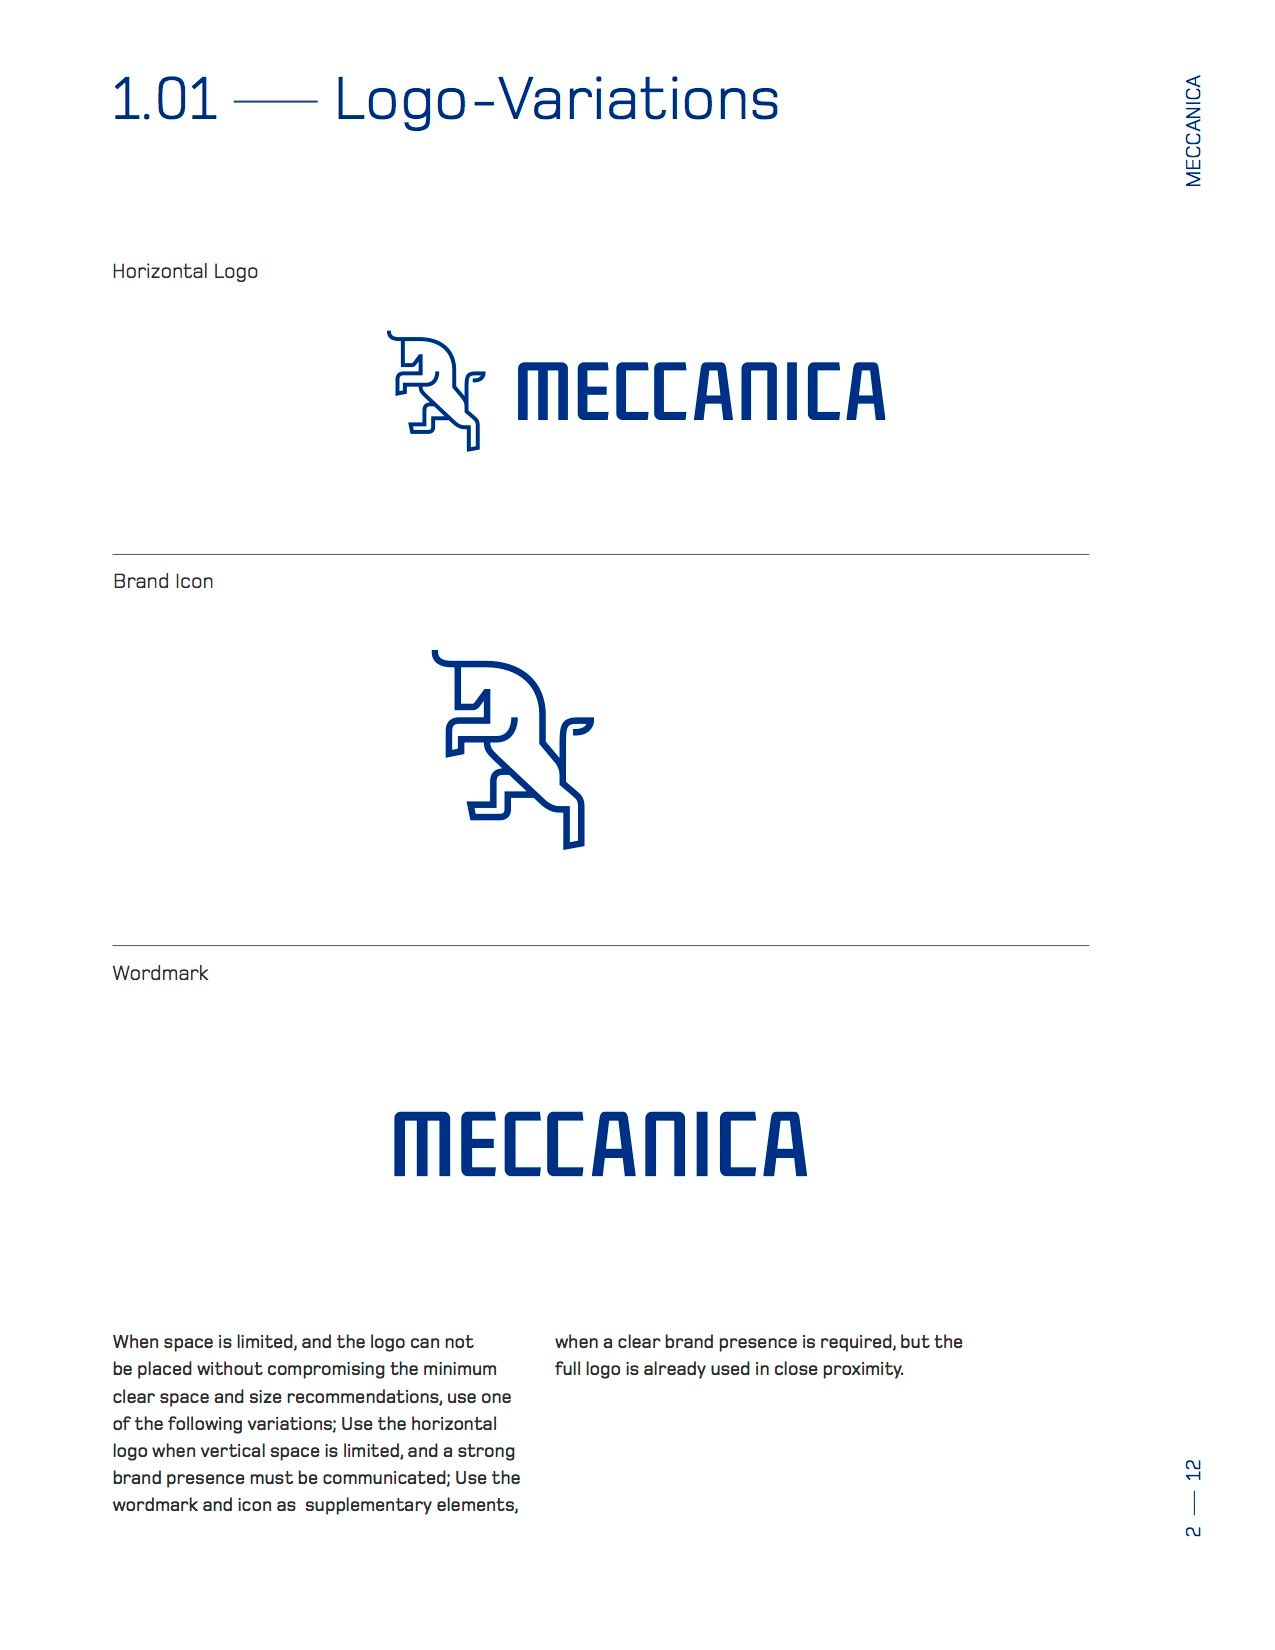 Meccanica Brand Guidelines Logo Variations